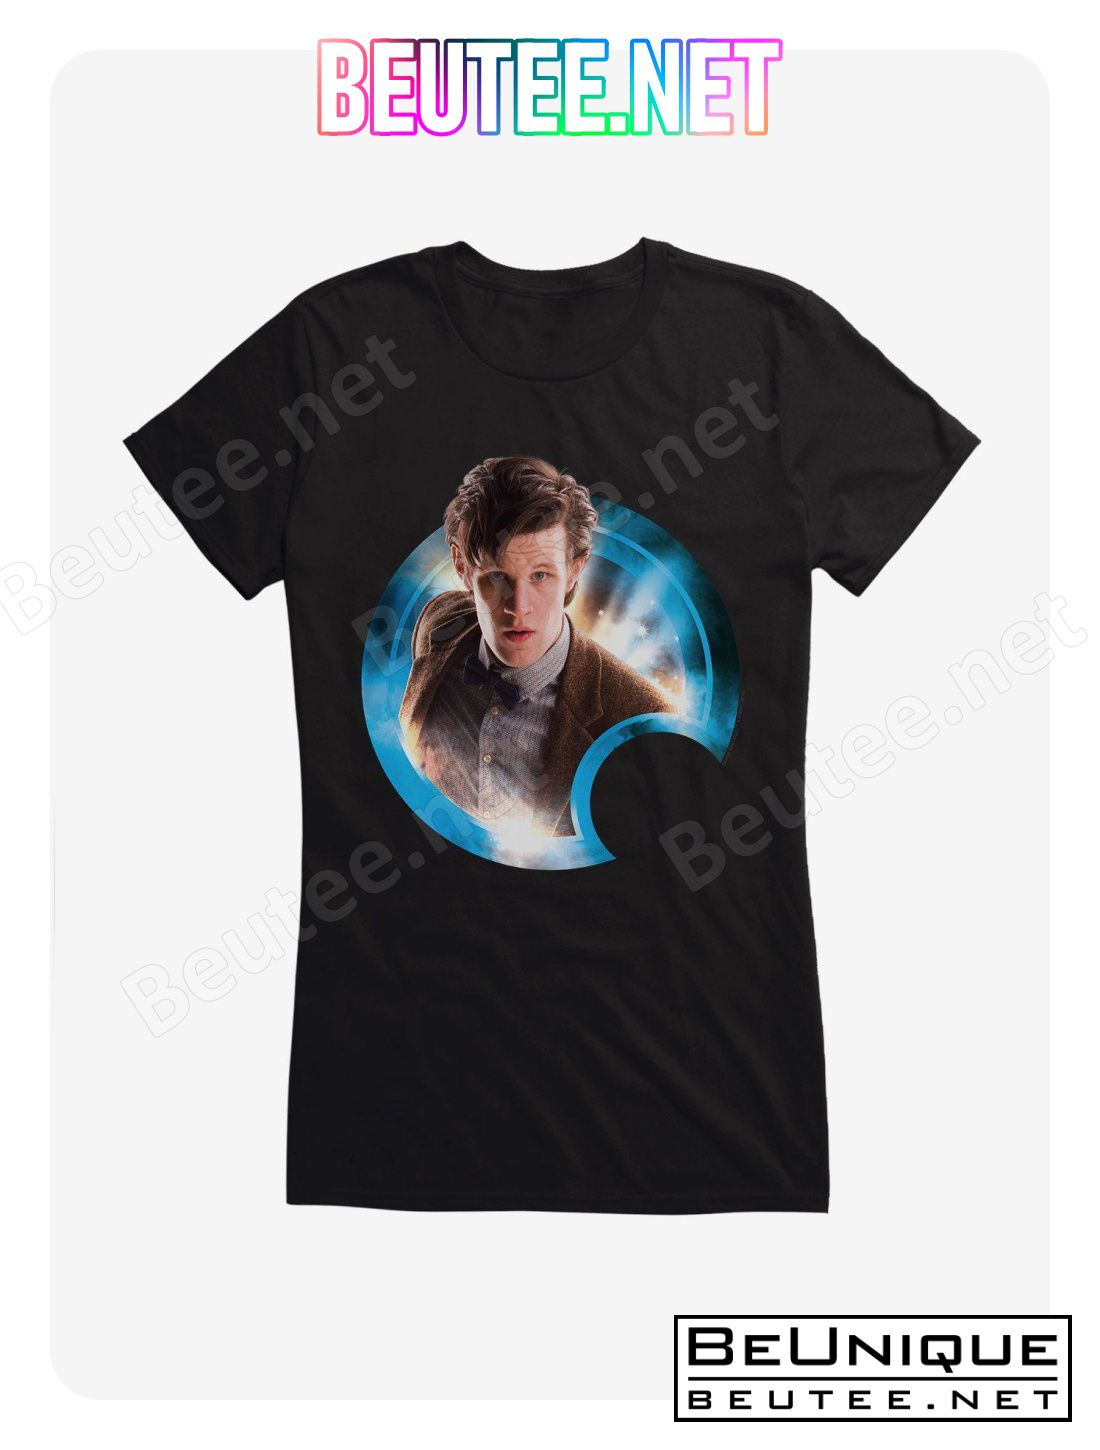 Doctor Who Eleventh Doctor Eclipse T-Shirt